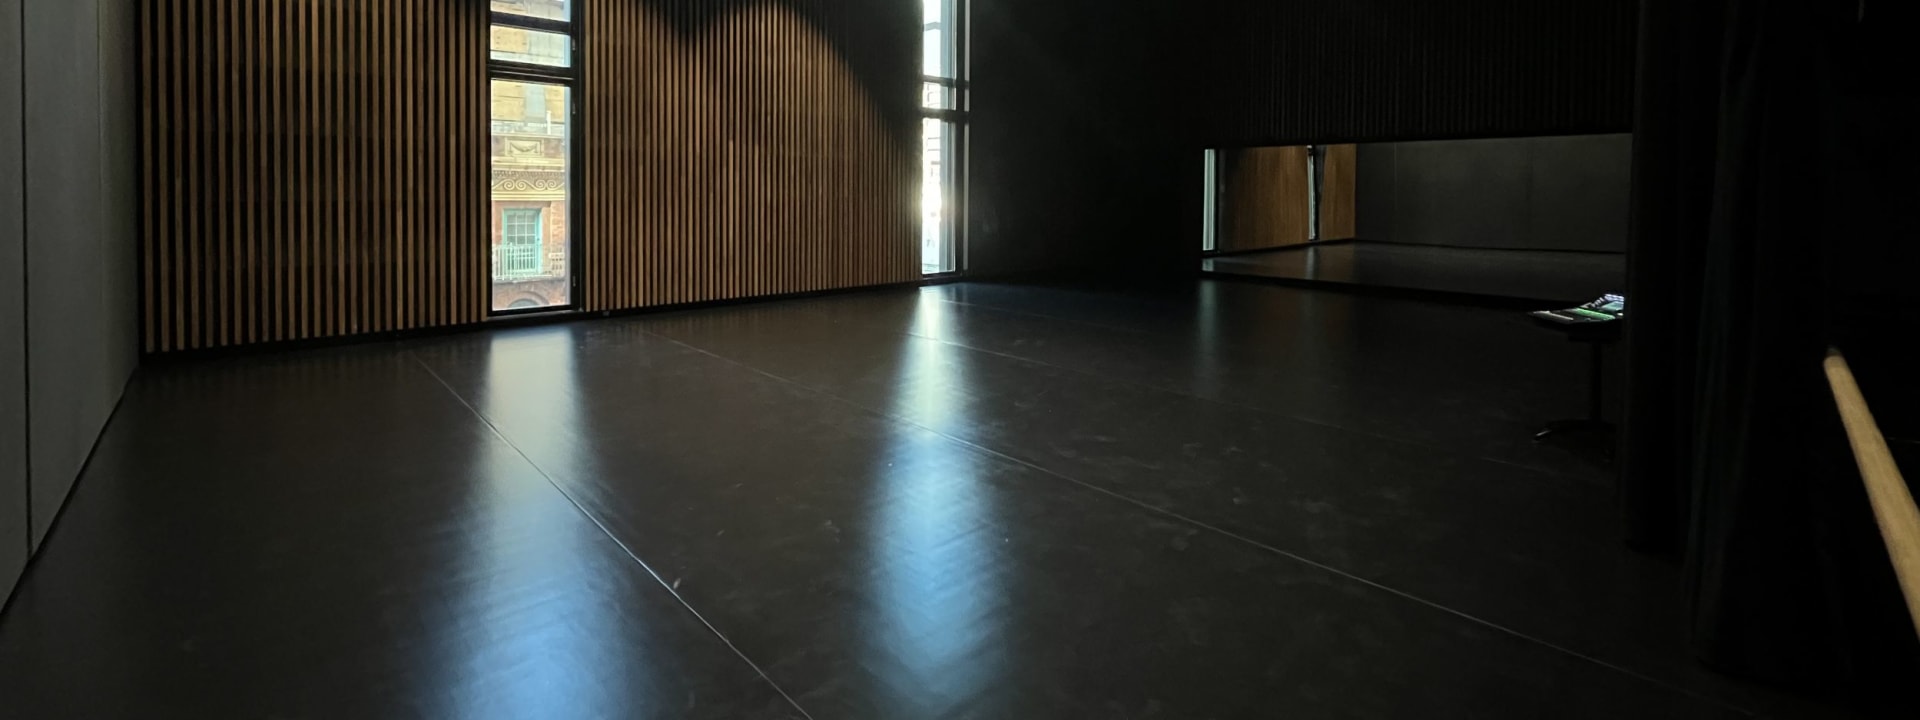 L2.1: Rehearsal Space at CoSCS